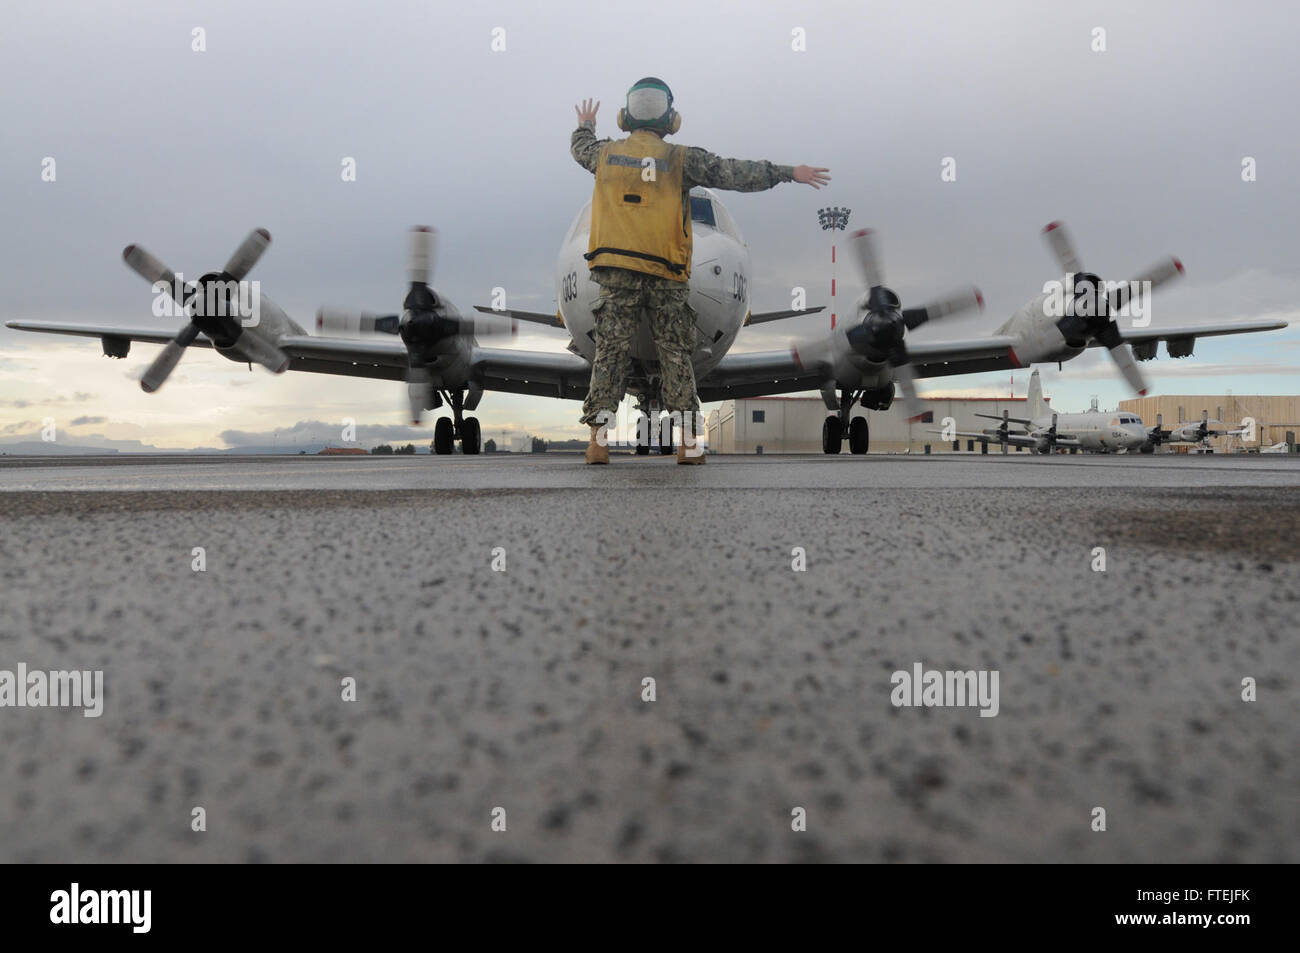 SIGONELLA, Sicily (Dec. 3, 2014) Aviation Electronics Technician 2nd Class Spencer Bean signals a P-3C Orion maritime patrol aircraft belonging to Patrol Squadron (VP) 4, Dec. 3, 2014. VP 4 is conducting naval operations in the U.S. 6th Fleet area of operations in support of U.S. national security interests in Europe. Stock Photo